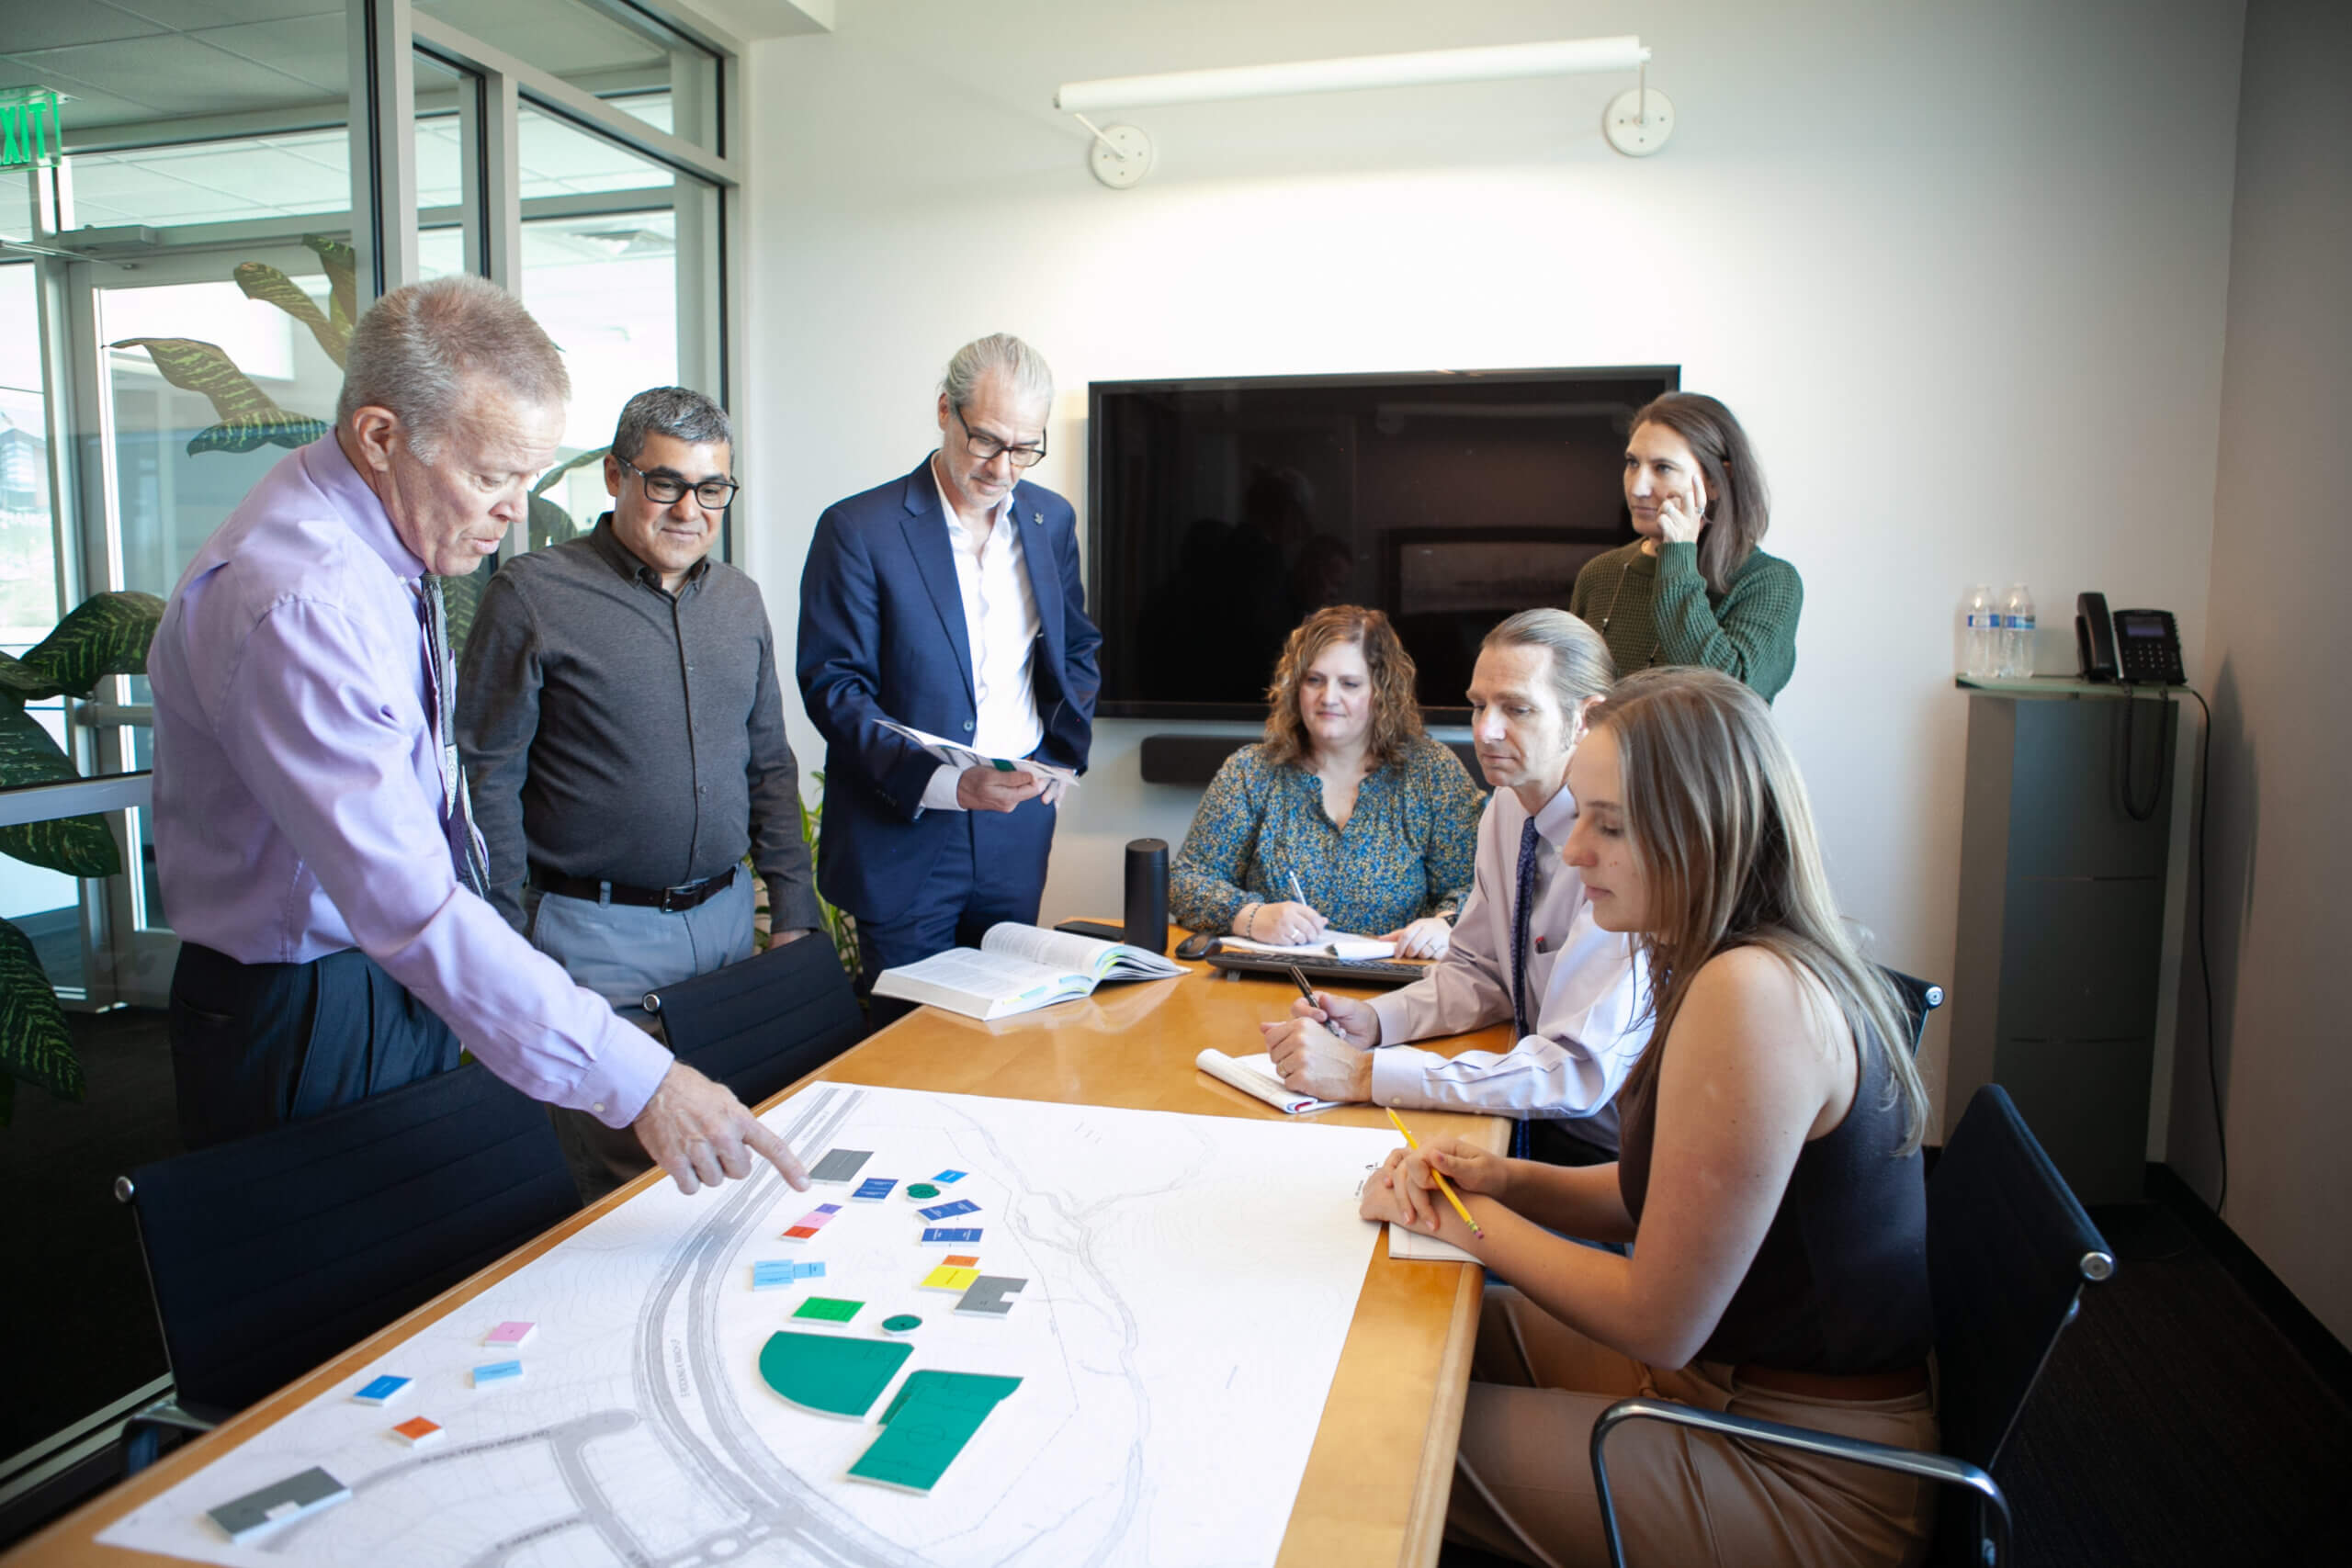 A team of architects sitting and standing around a conference table discussing architectural design on a large diagram